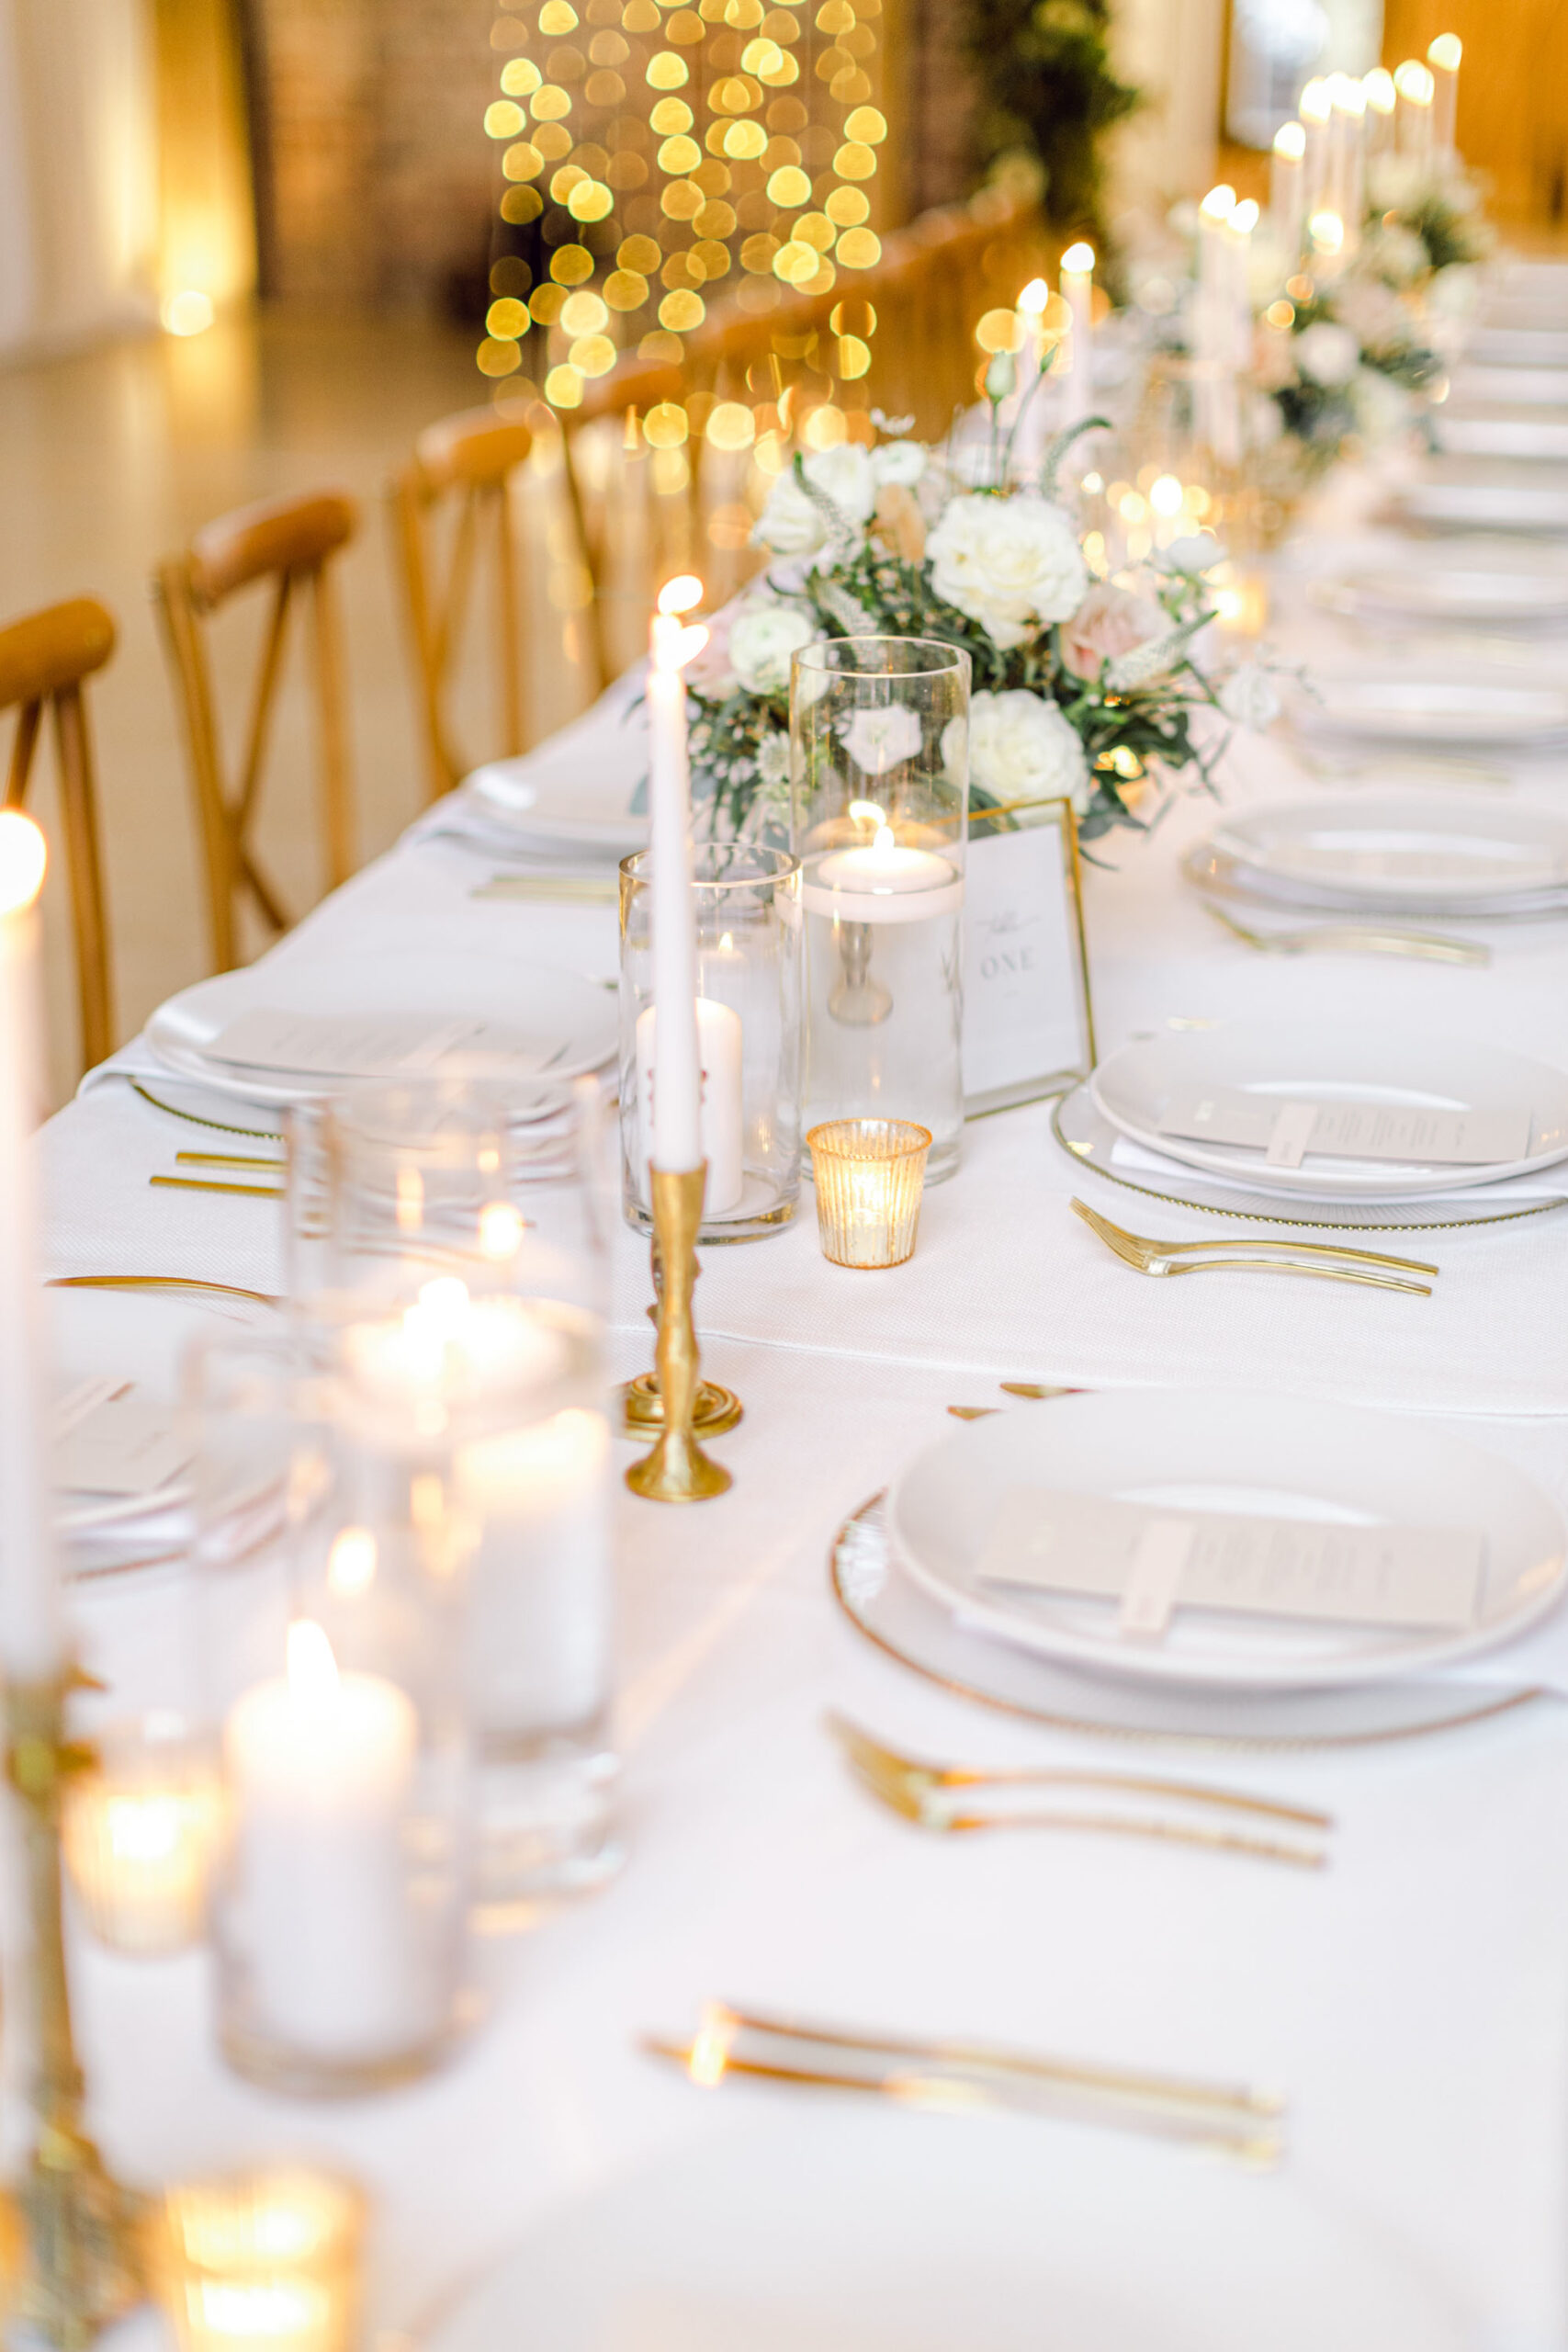 Twinkling floating candles line the centre of a luxury wedding table with gold cutlery and white plates. Styling by Illy Elizabeth Weddings. Photo by Natalie D Photography